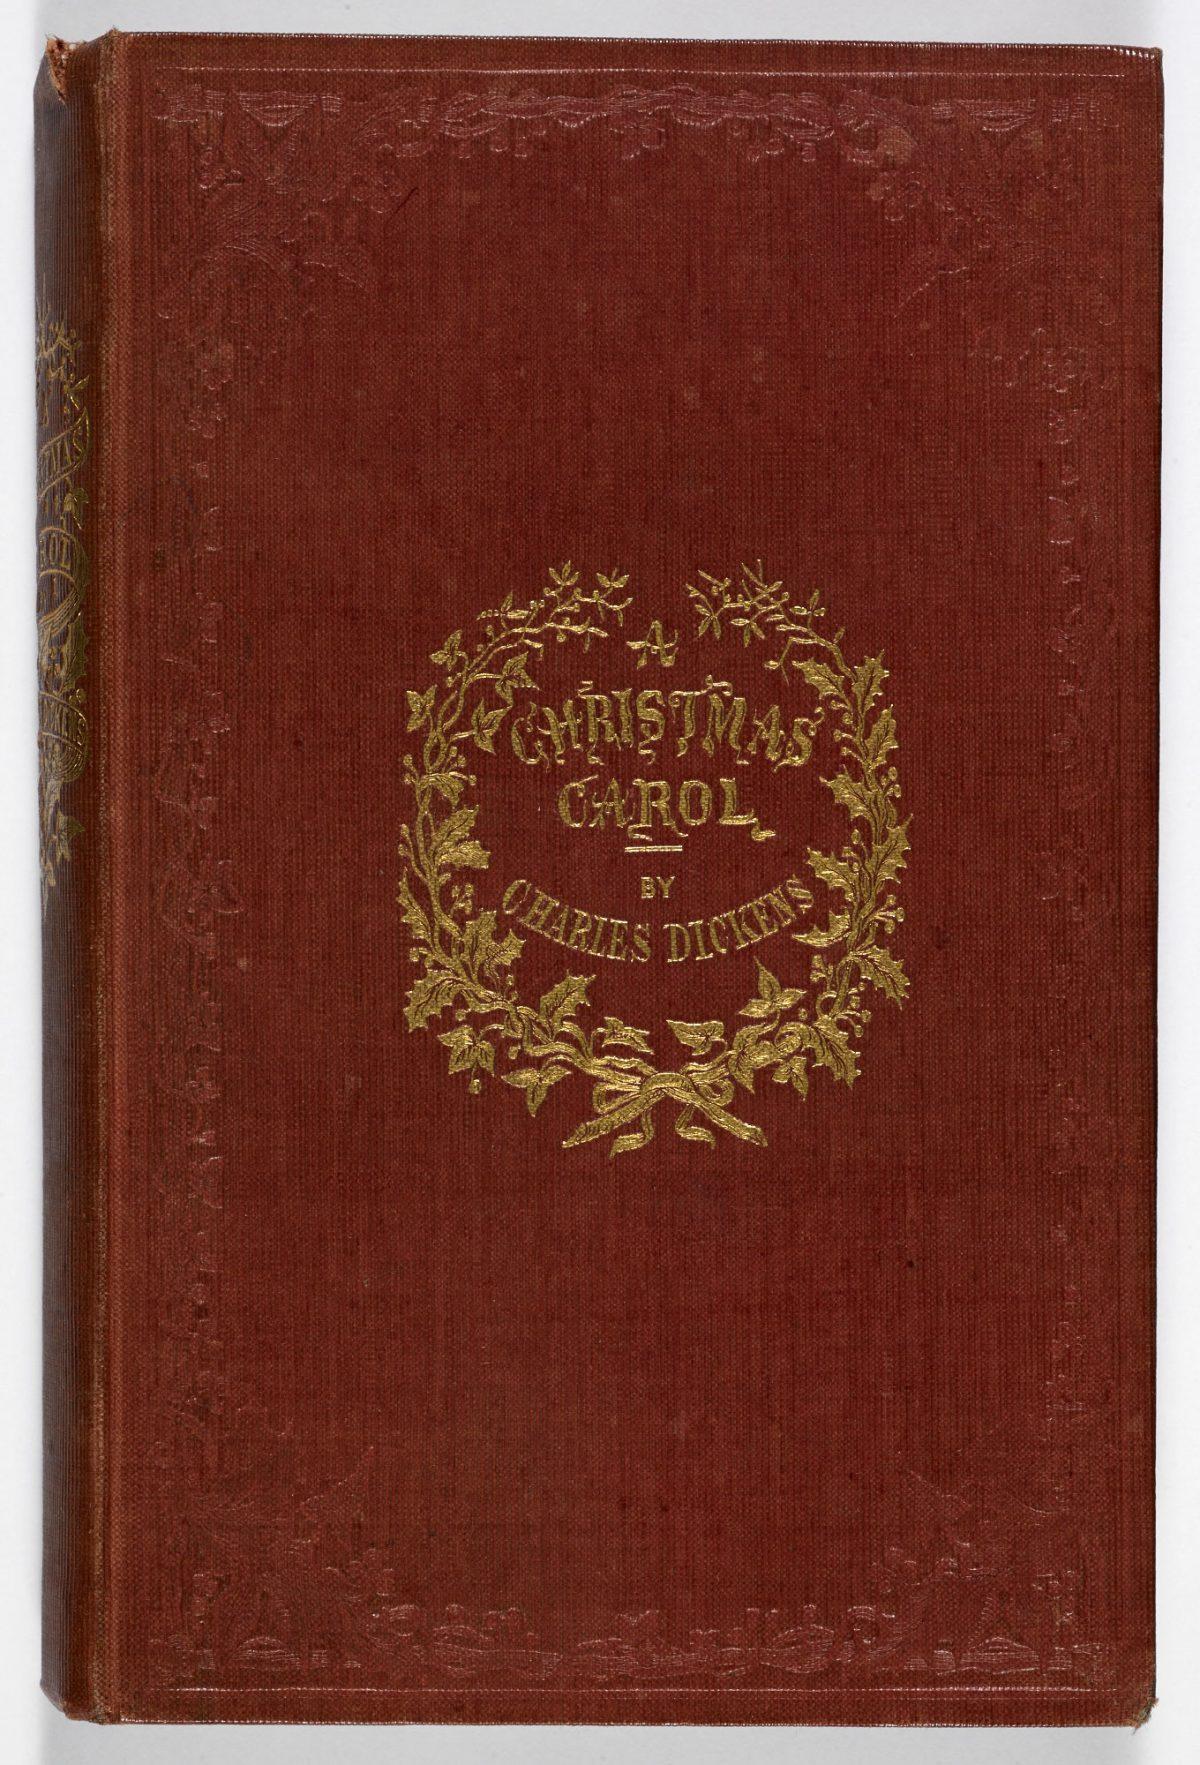 "A Christmas Carol," 1843, by Charles Dickens, published Dec. 19, 1843. (Public Domain)